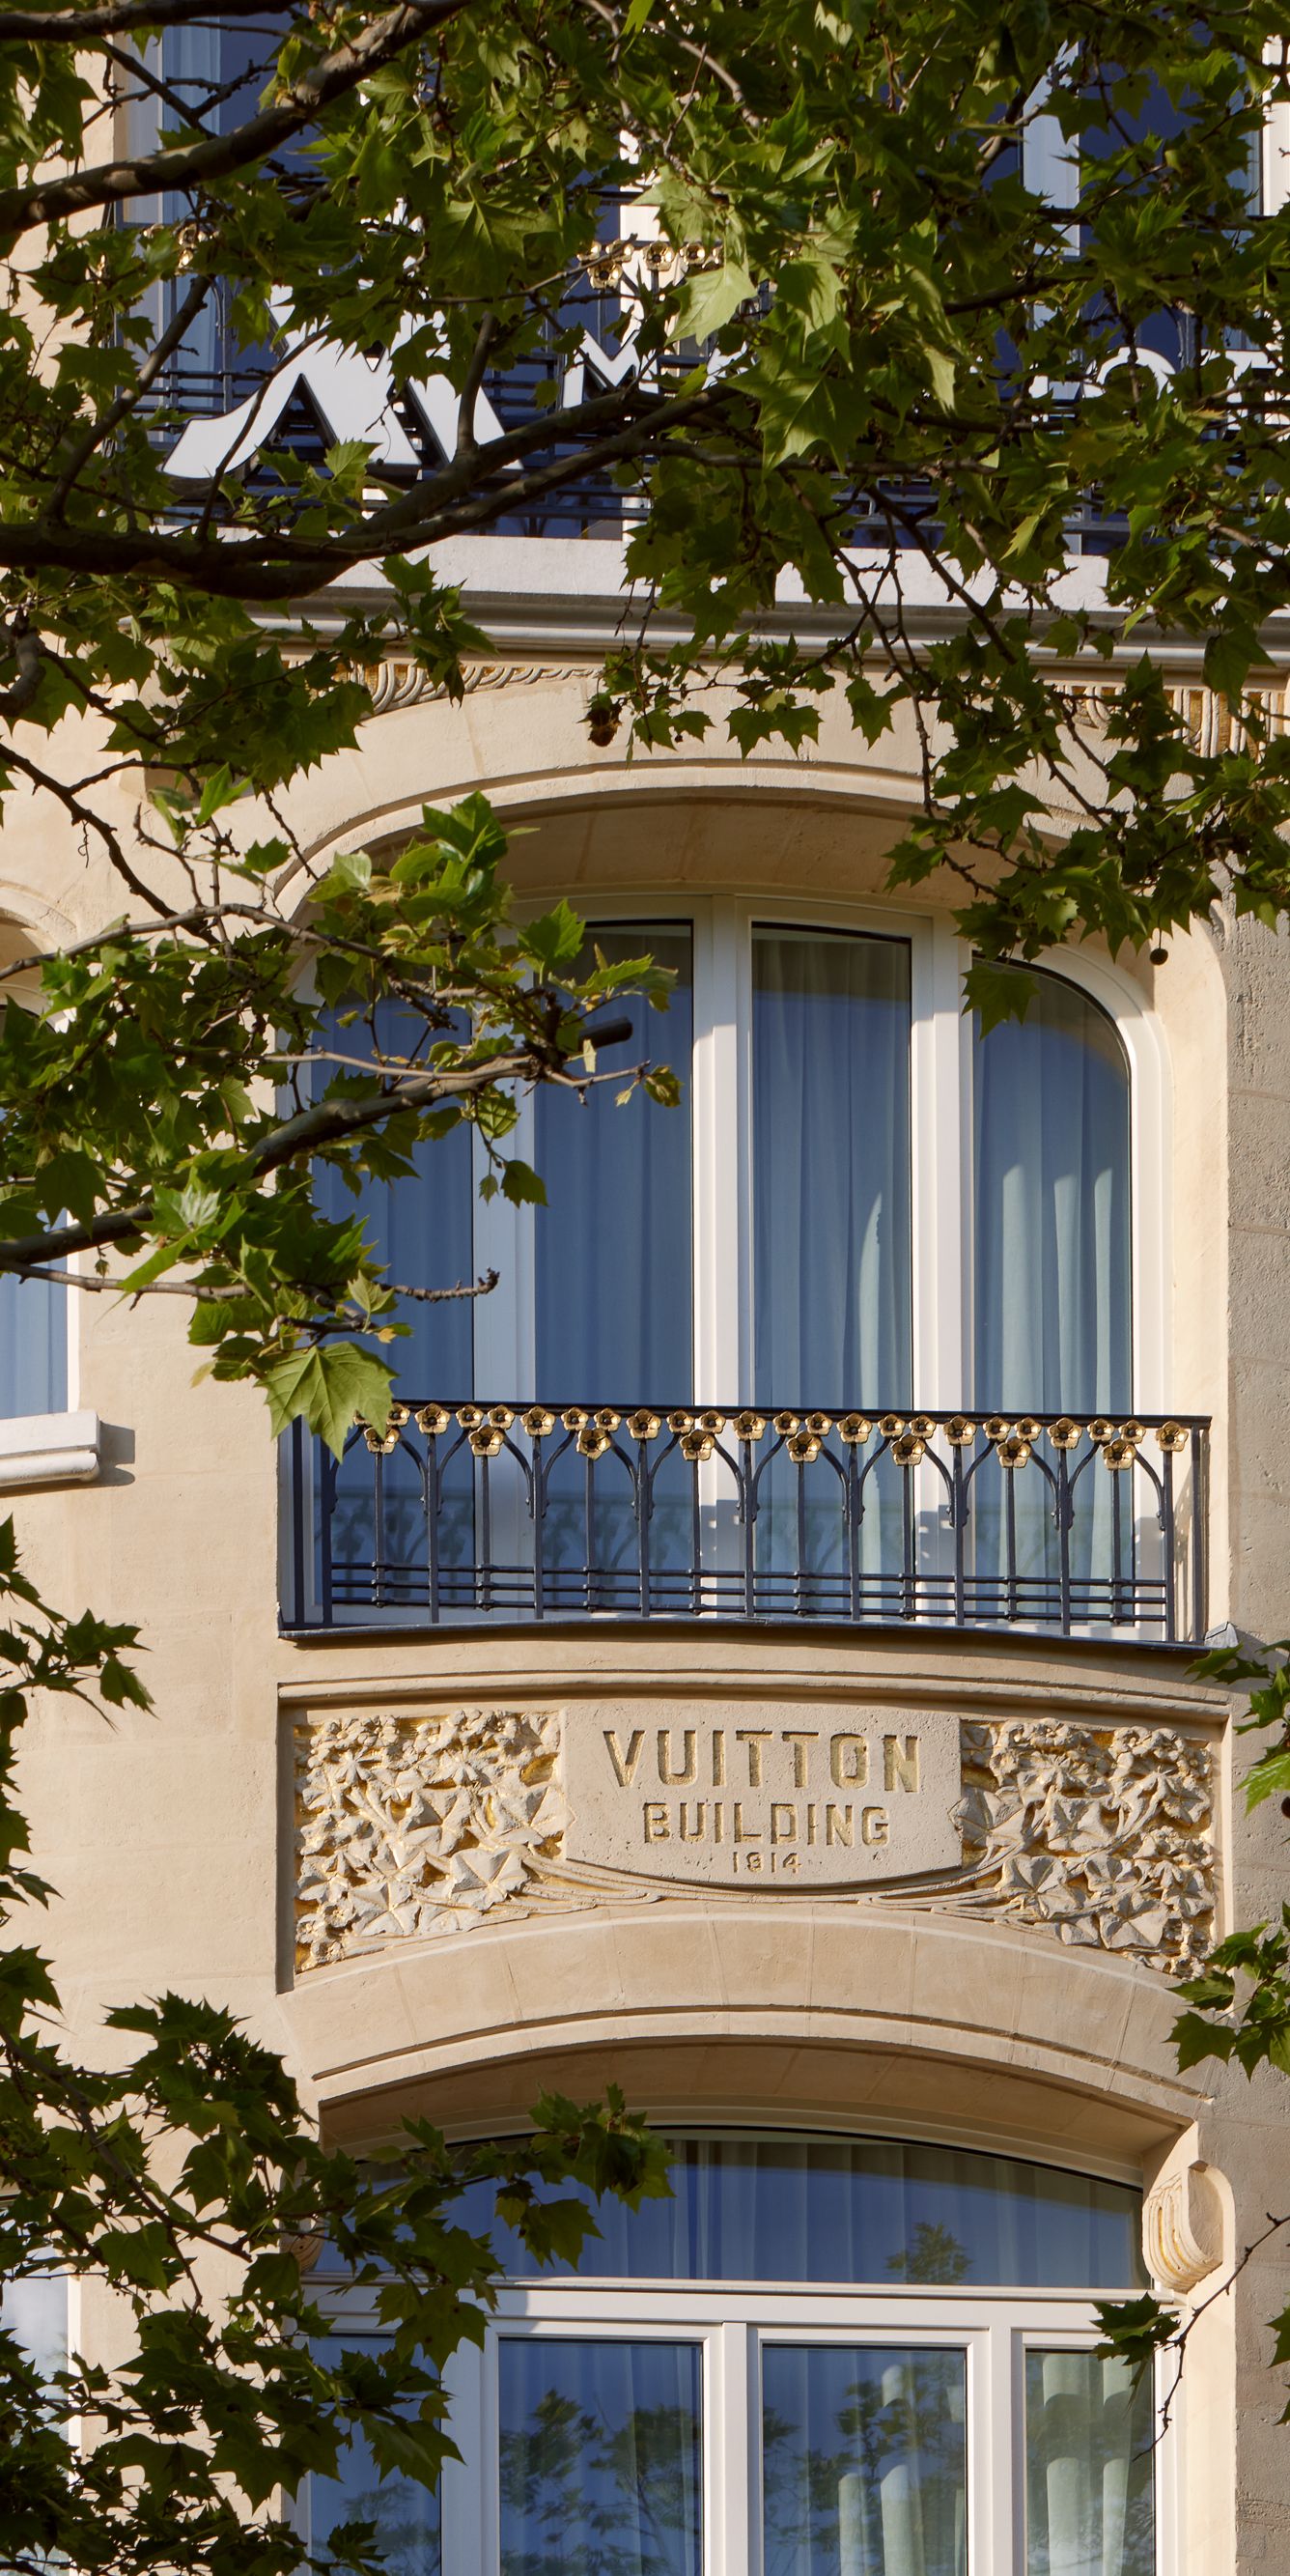 Get ready for Louis Vuitton's first-ever luxury hotel: the Paris